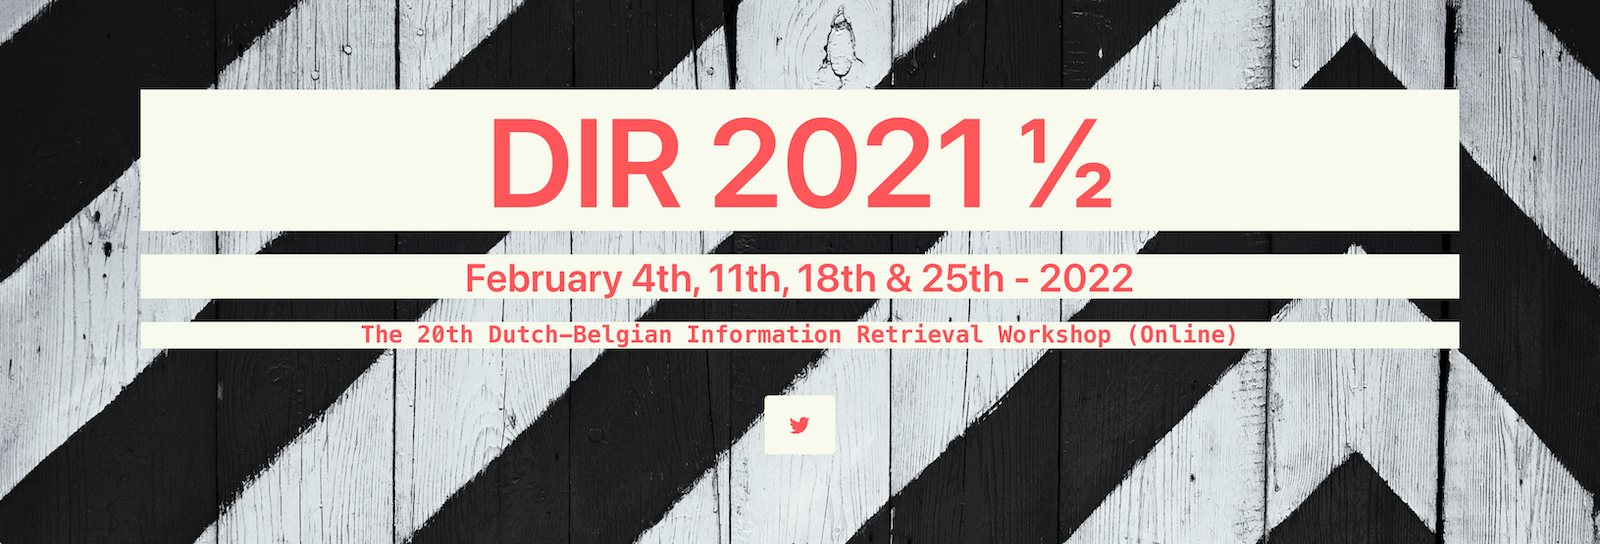 DIR 2021 ½ Is About To Start